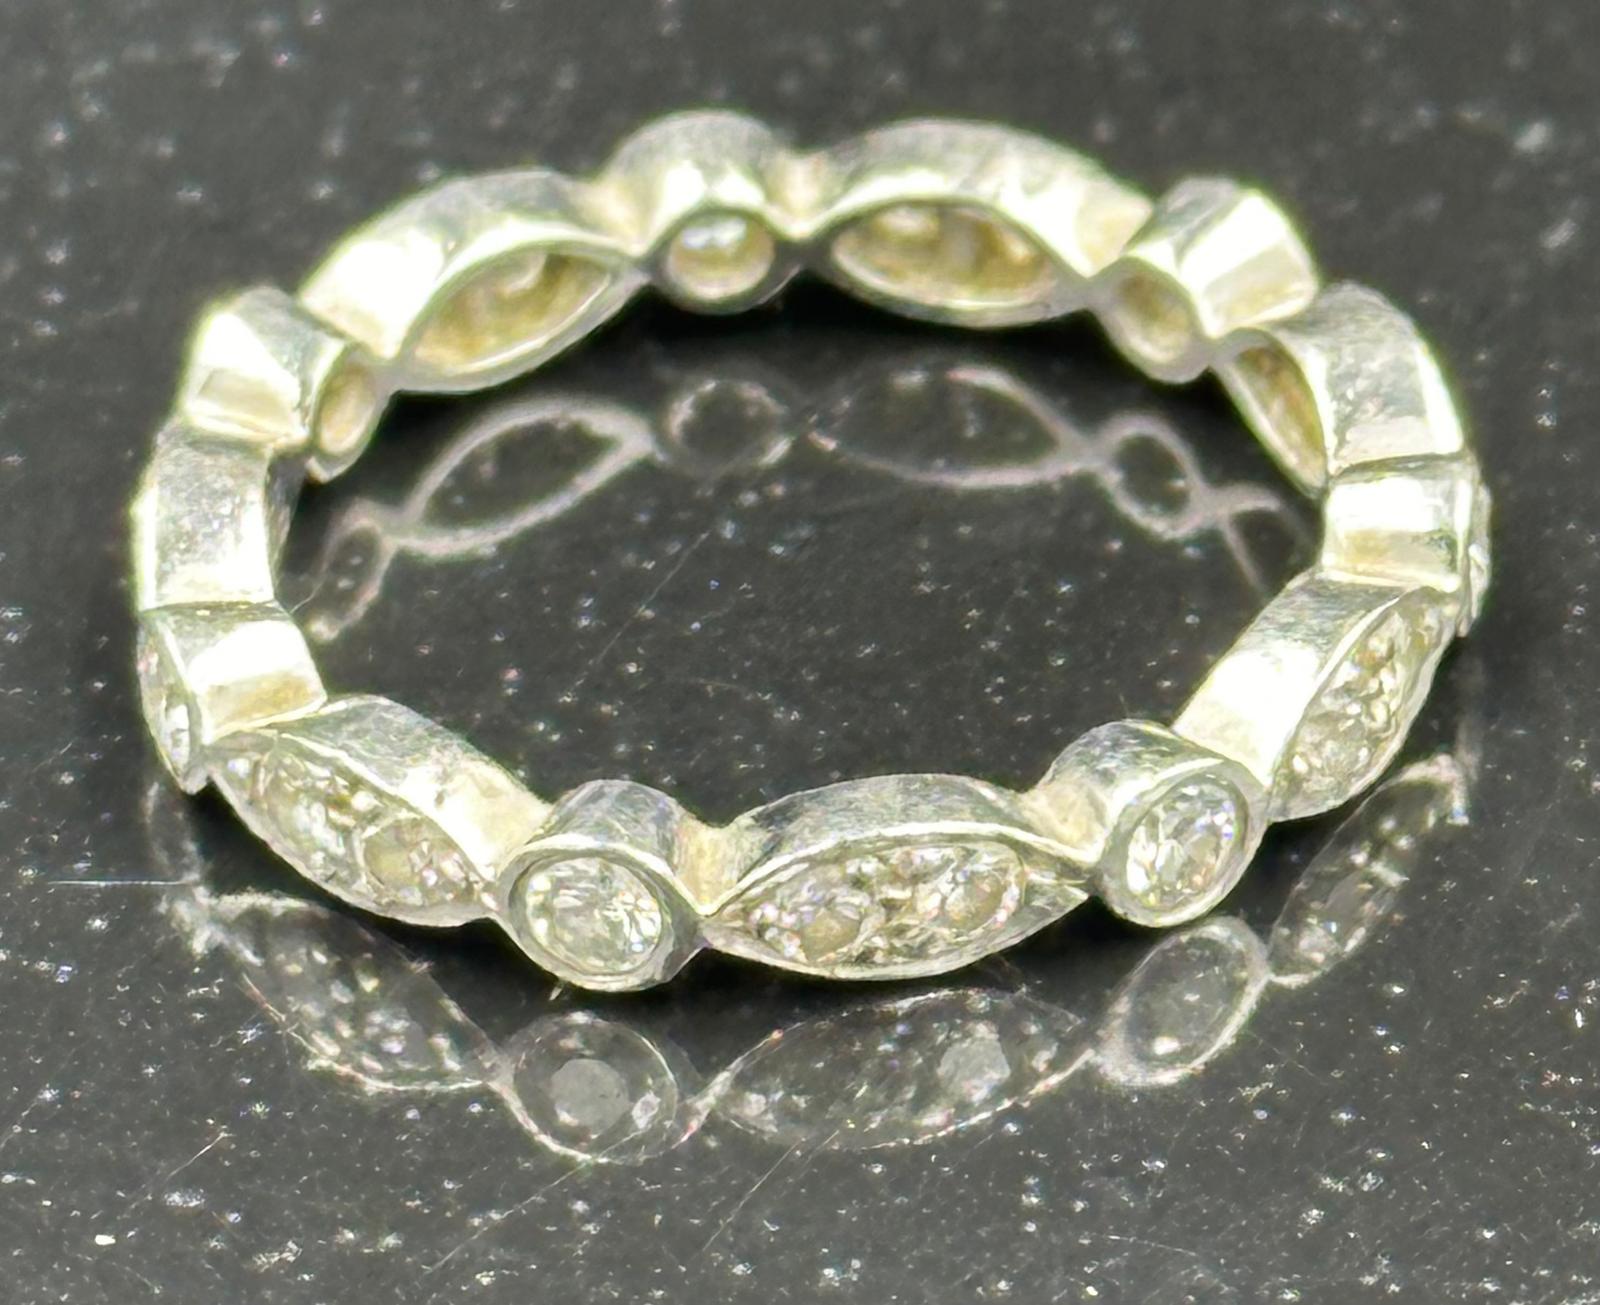 Diamond eternity ring mounted in platinum. Signed T&C 950. Total diamond weight approximately